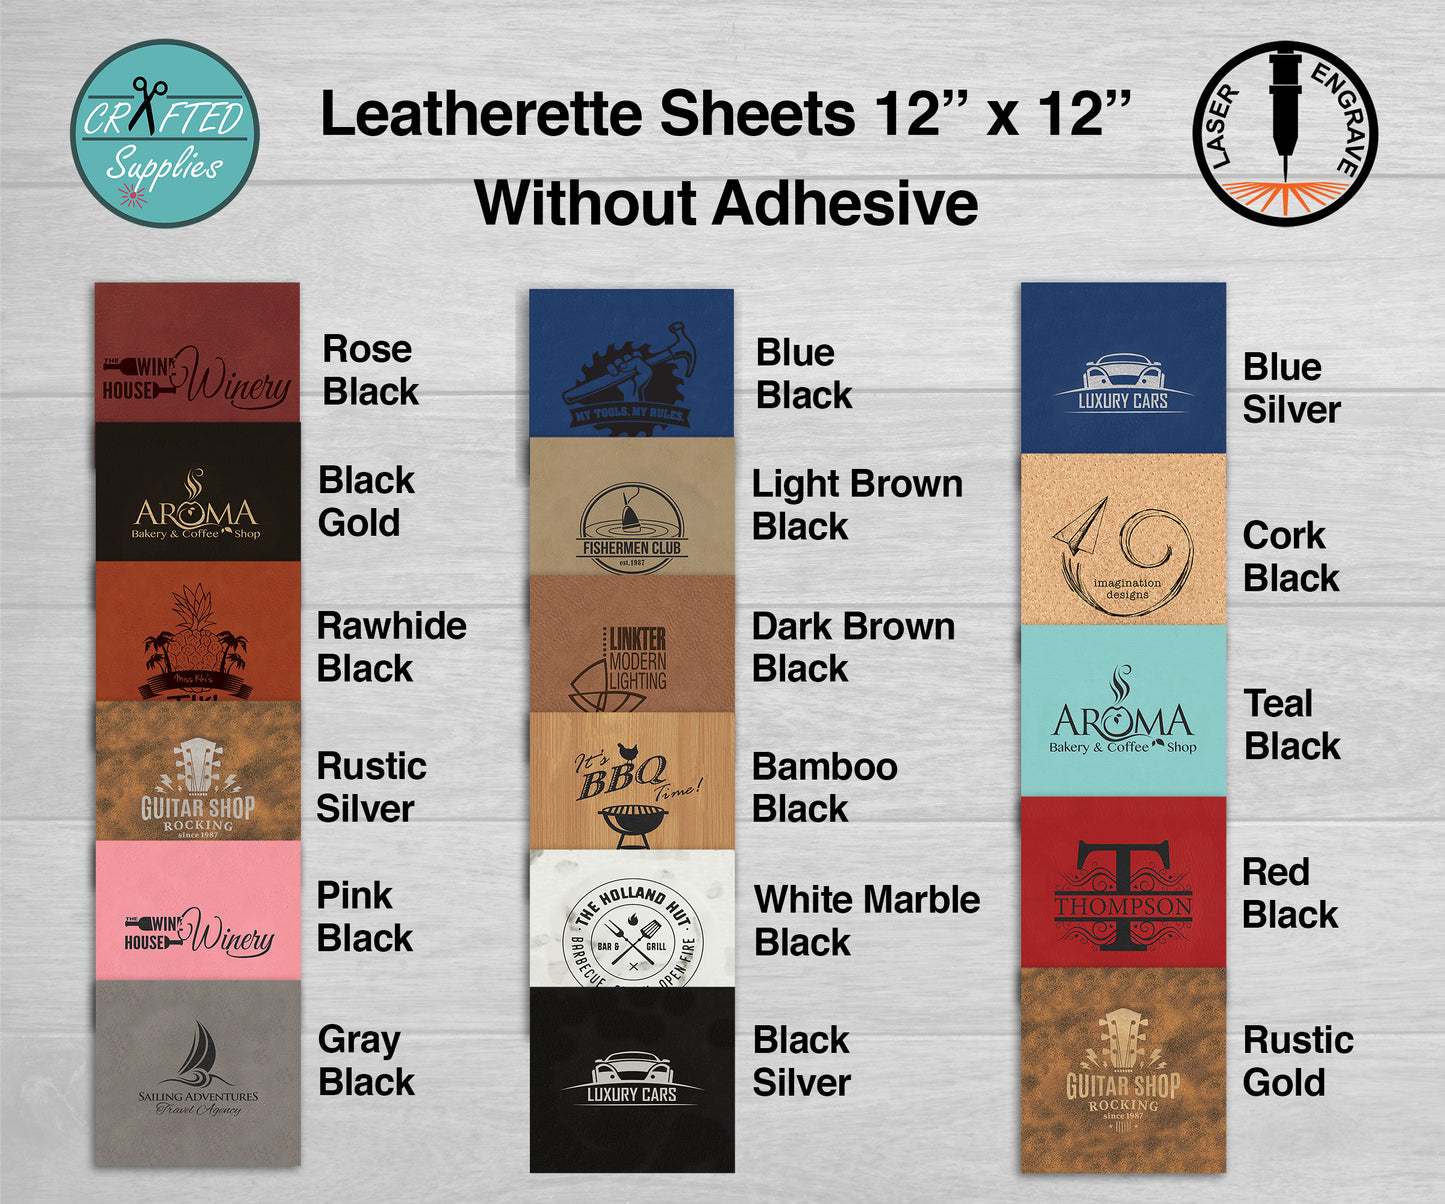 Leatherette Sheet Without Adhesive